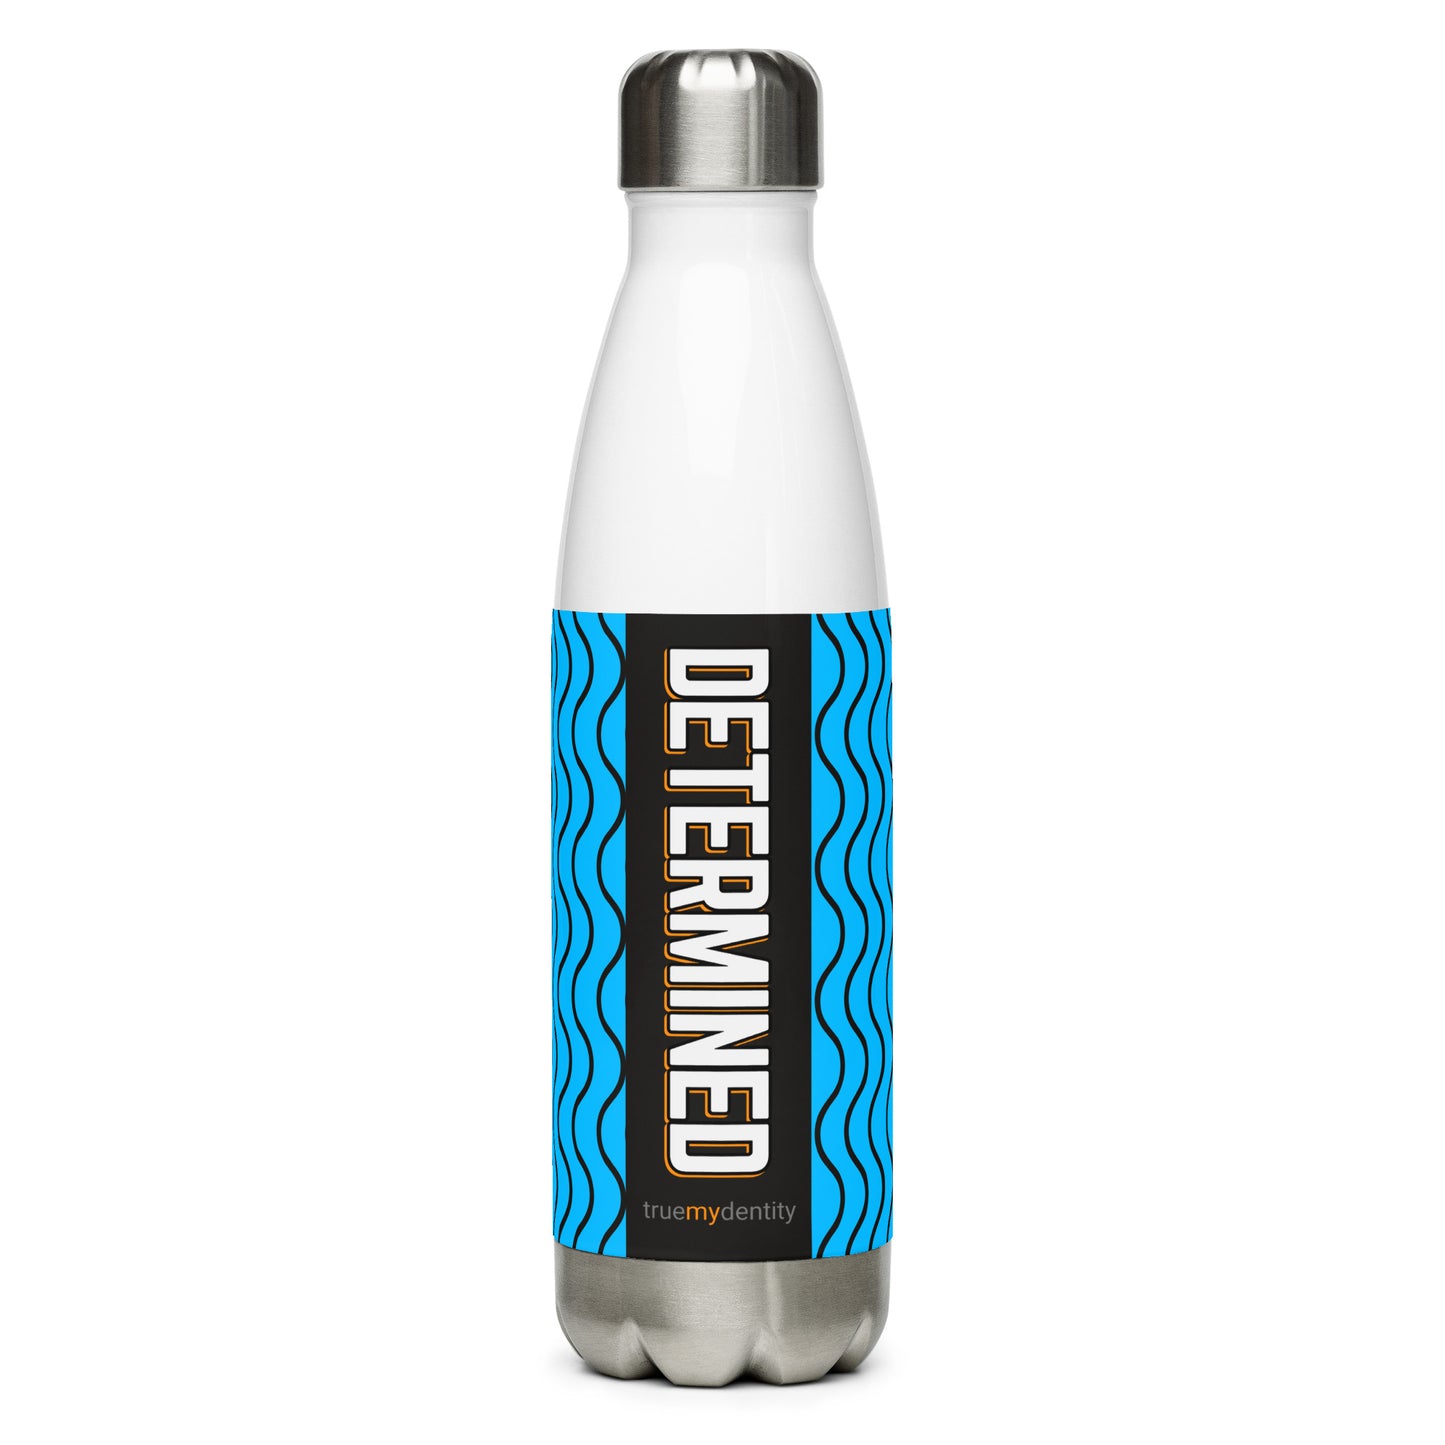 DETERMINED Stainless Steel Water Bottle Blue Wave Design, 17 oz, in Black or White